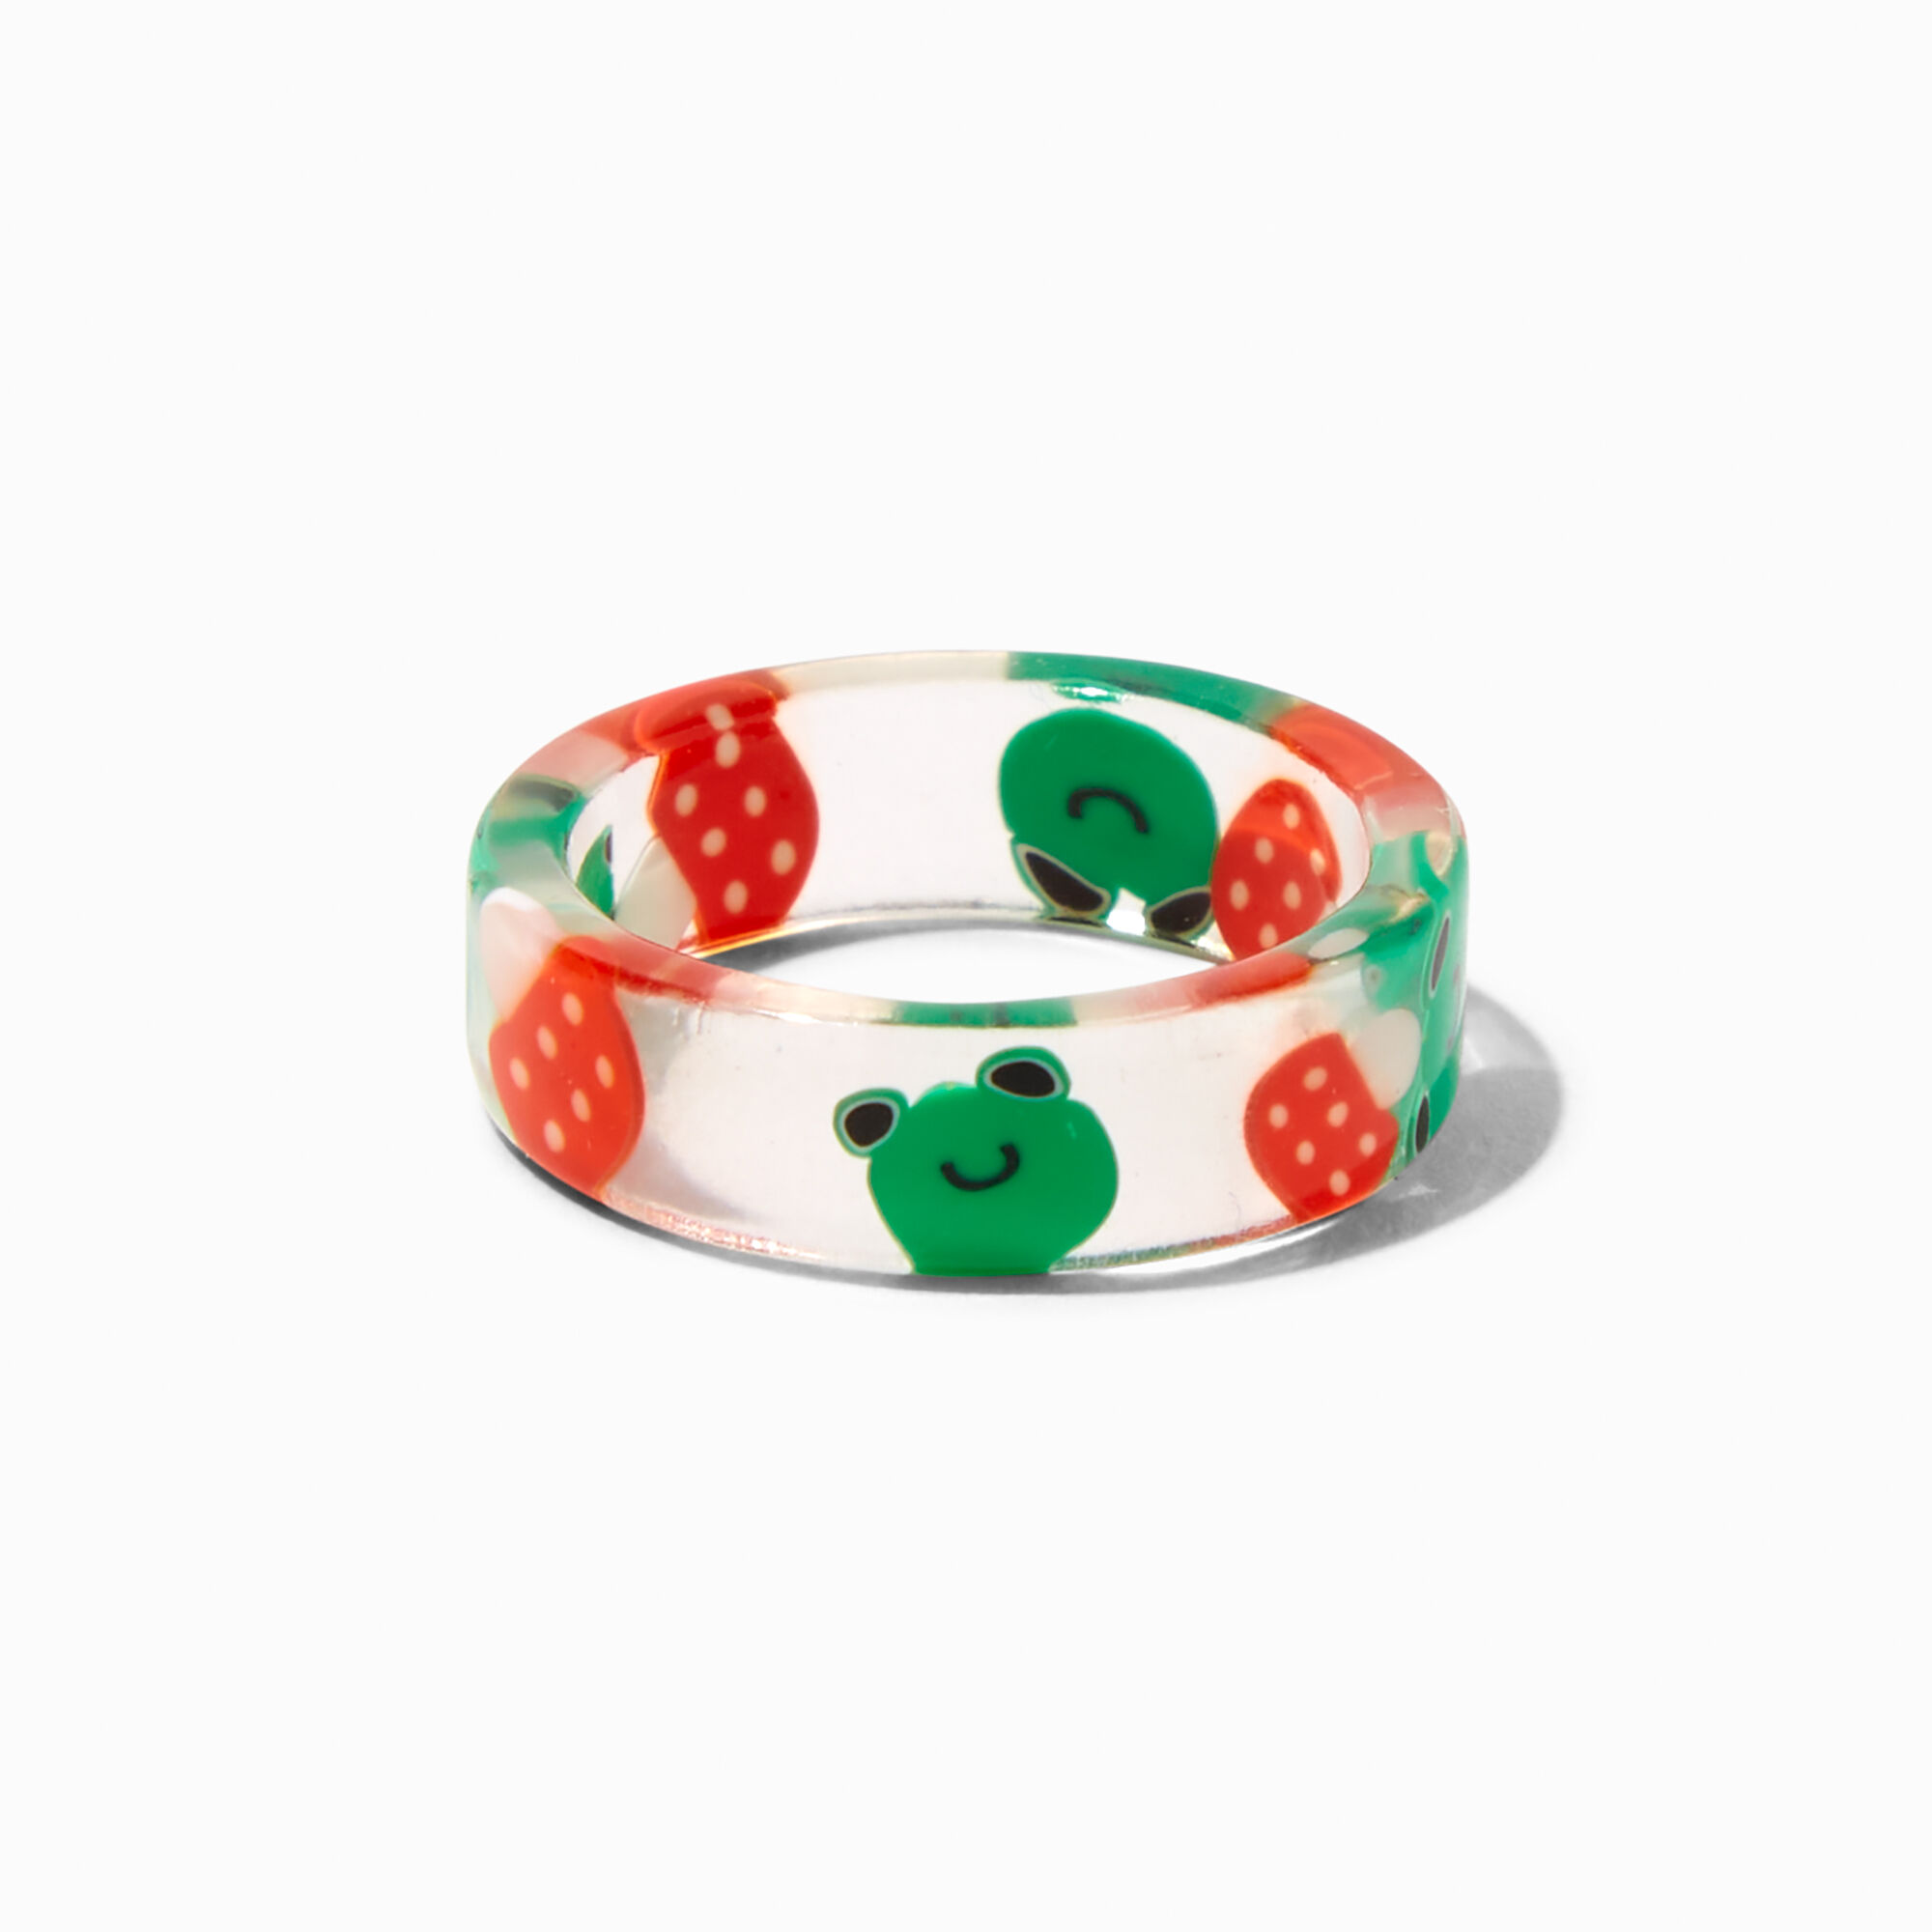 View Claires Mushrooms Green Frogs Resin Ring Red information